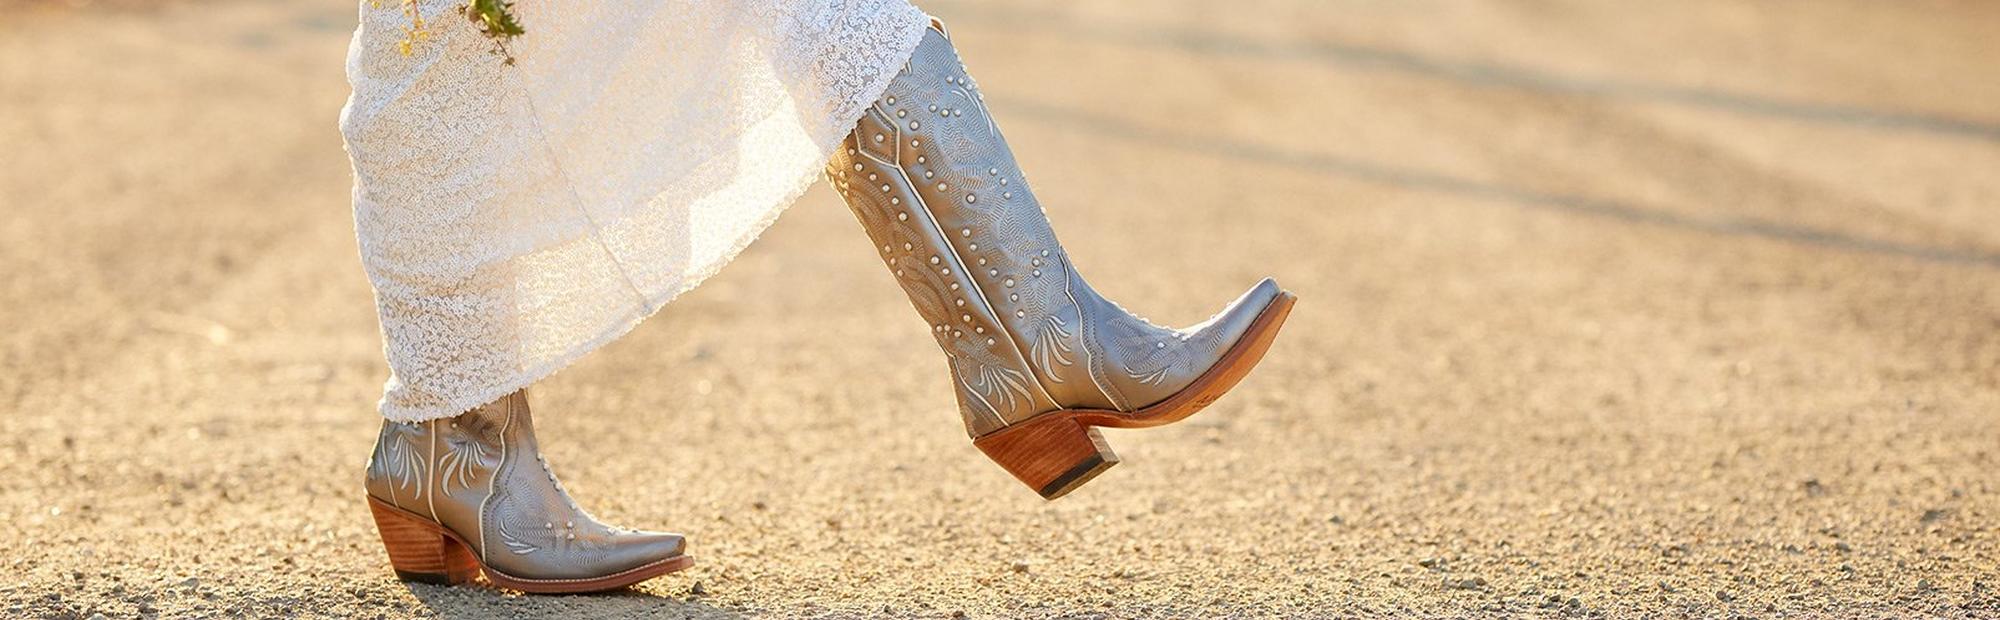 Wedding Dress With Cowboy Boots - Ariat Style Guide | Ariat